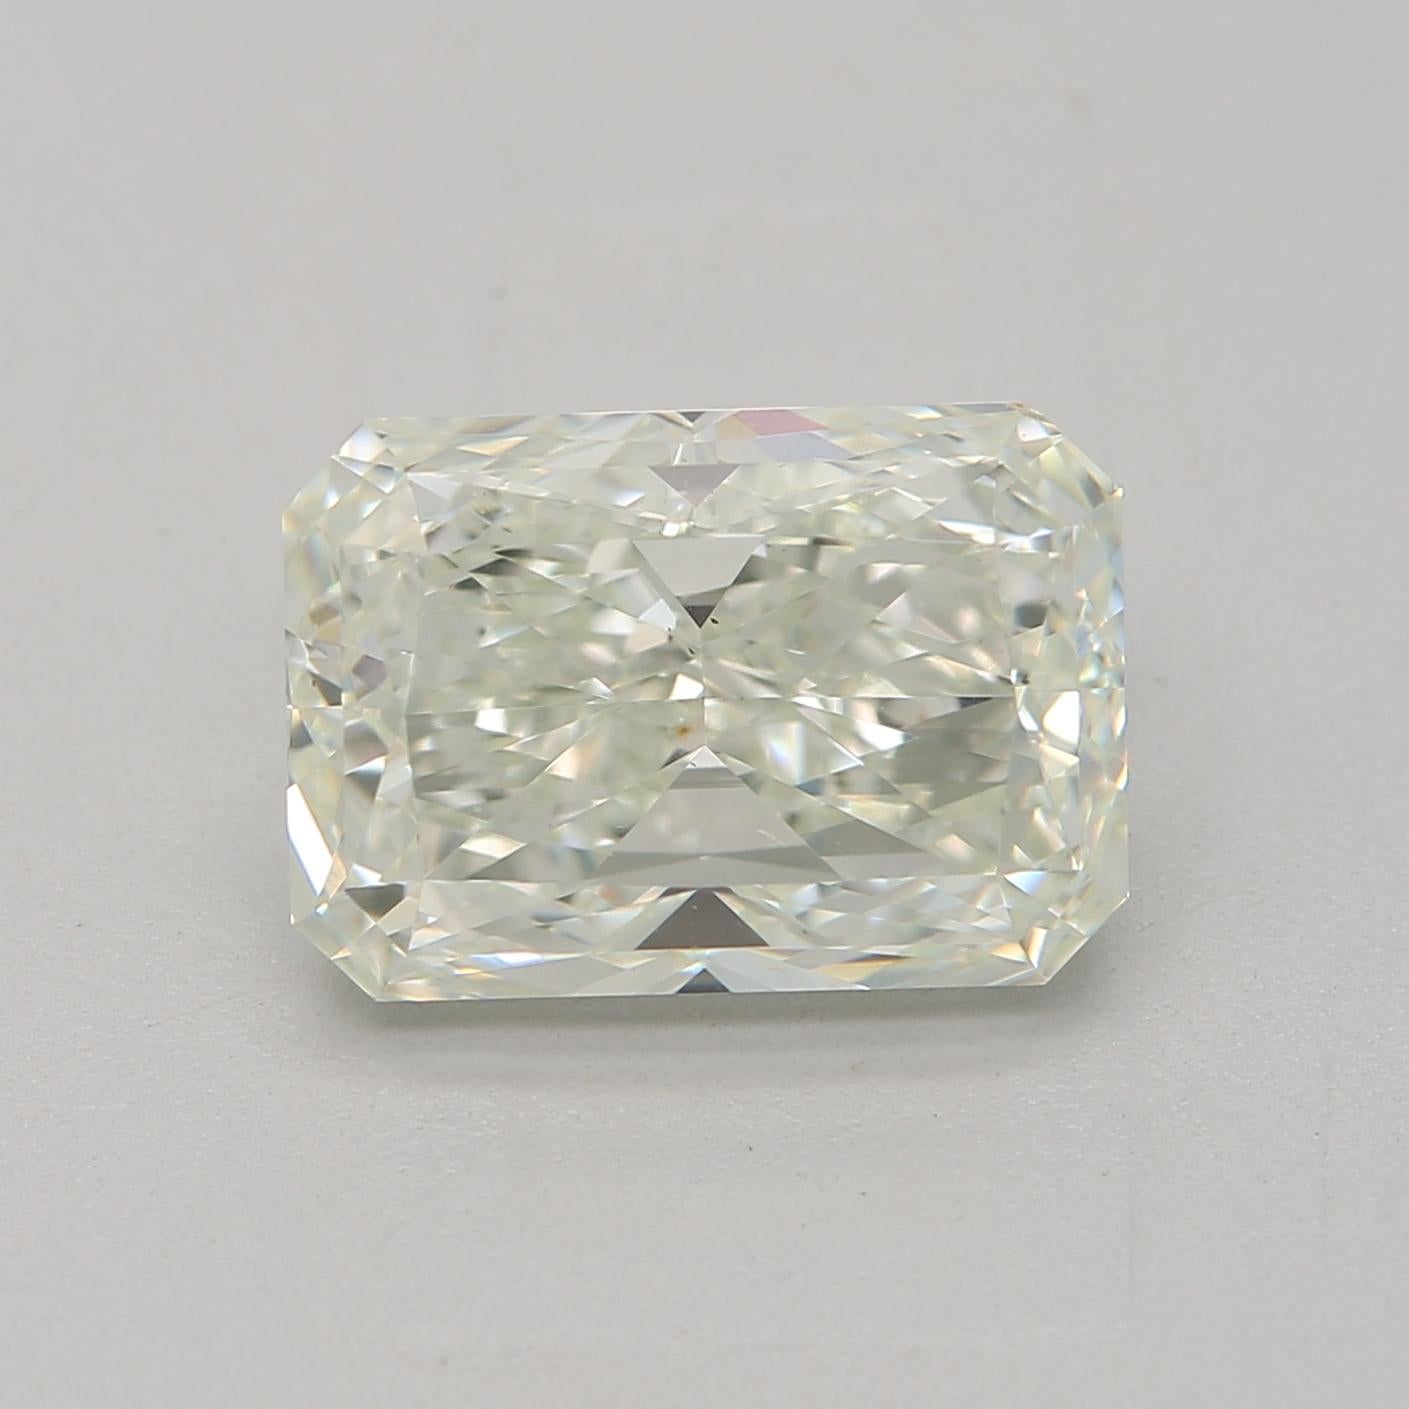 *100% NATURAL FANCY COLOUR DIAMOND*

✪ Diamond Details ✪

➛ Shape: Radiant
➛ Colour Grade: Very Light Green
➛ Carat: 2.00
➛ Clarity: SI1
➛ GIA Certified 

^FEATURES OF THE DIAMOND^

Our radiant cut diamond is a square or rectangular-shaped piece